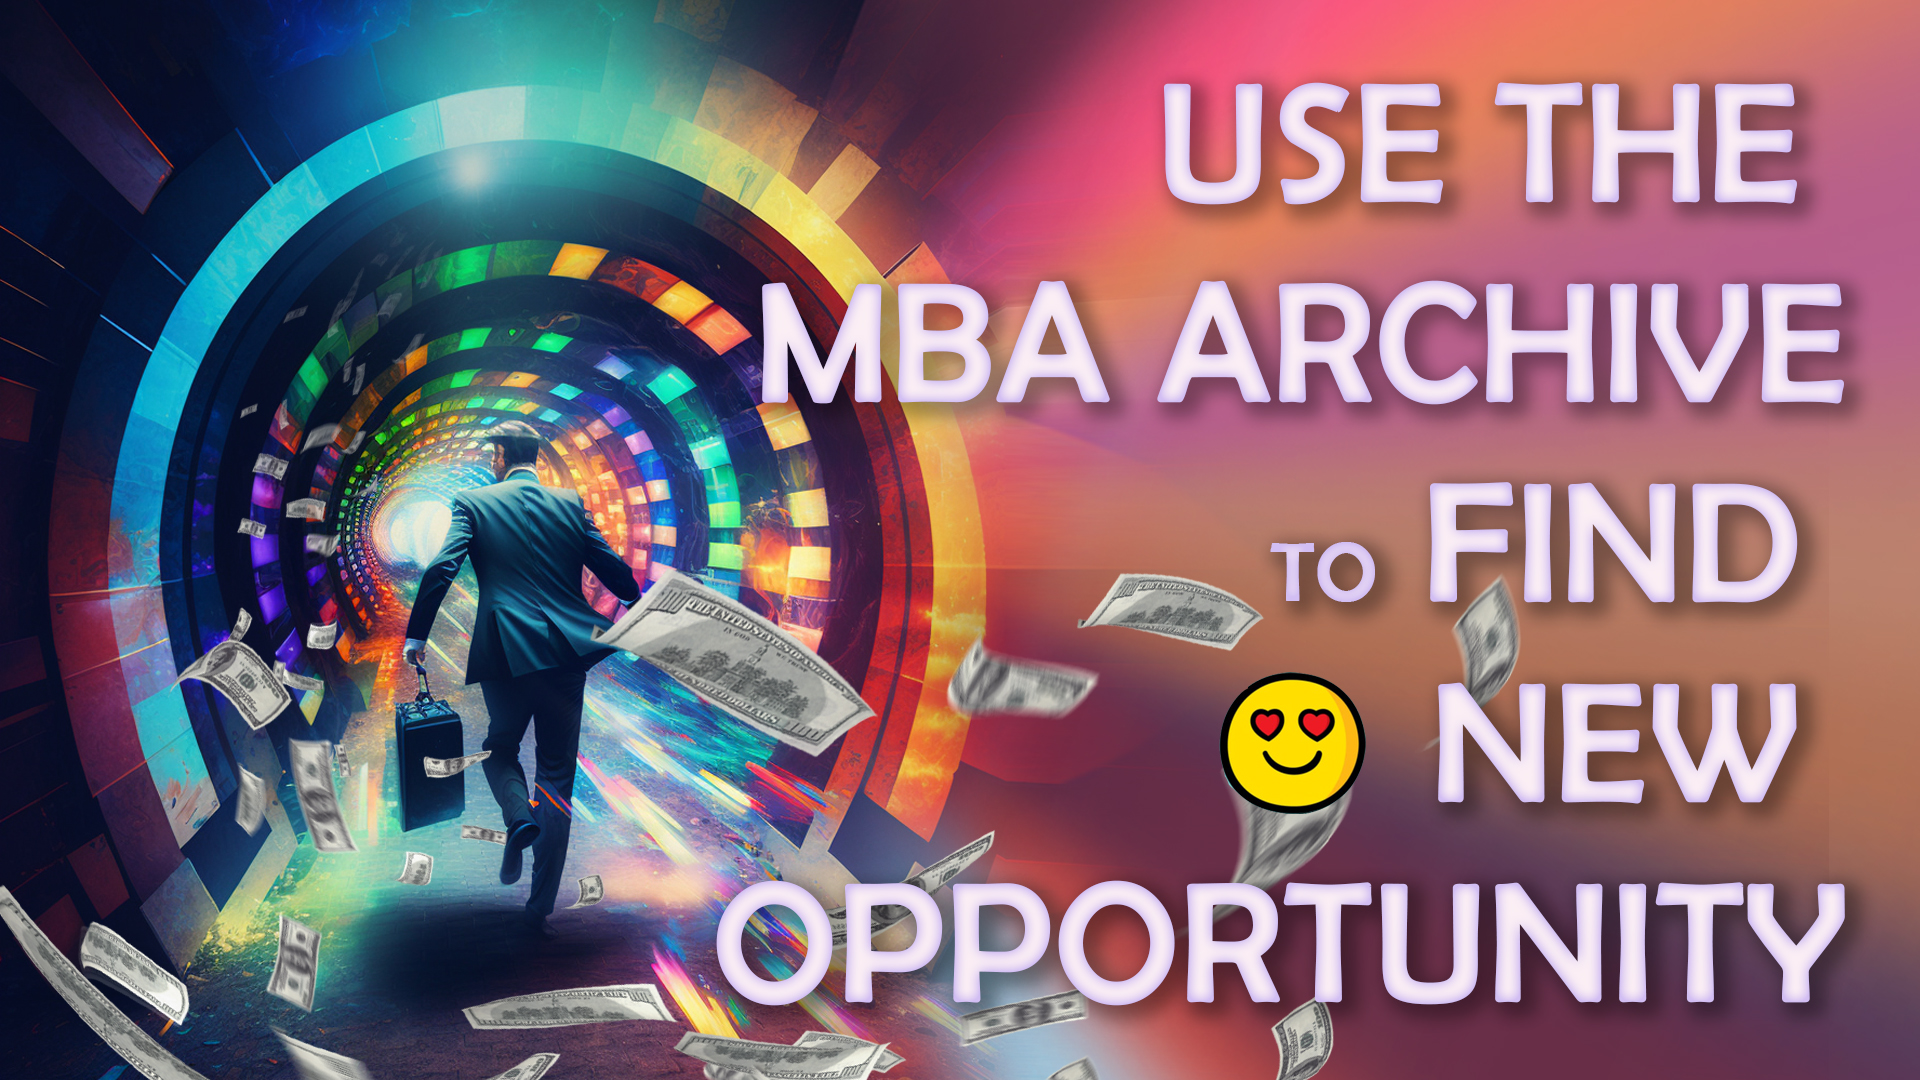 MBA  Archive is a magical historical time machine and comparison tool.